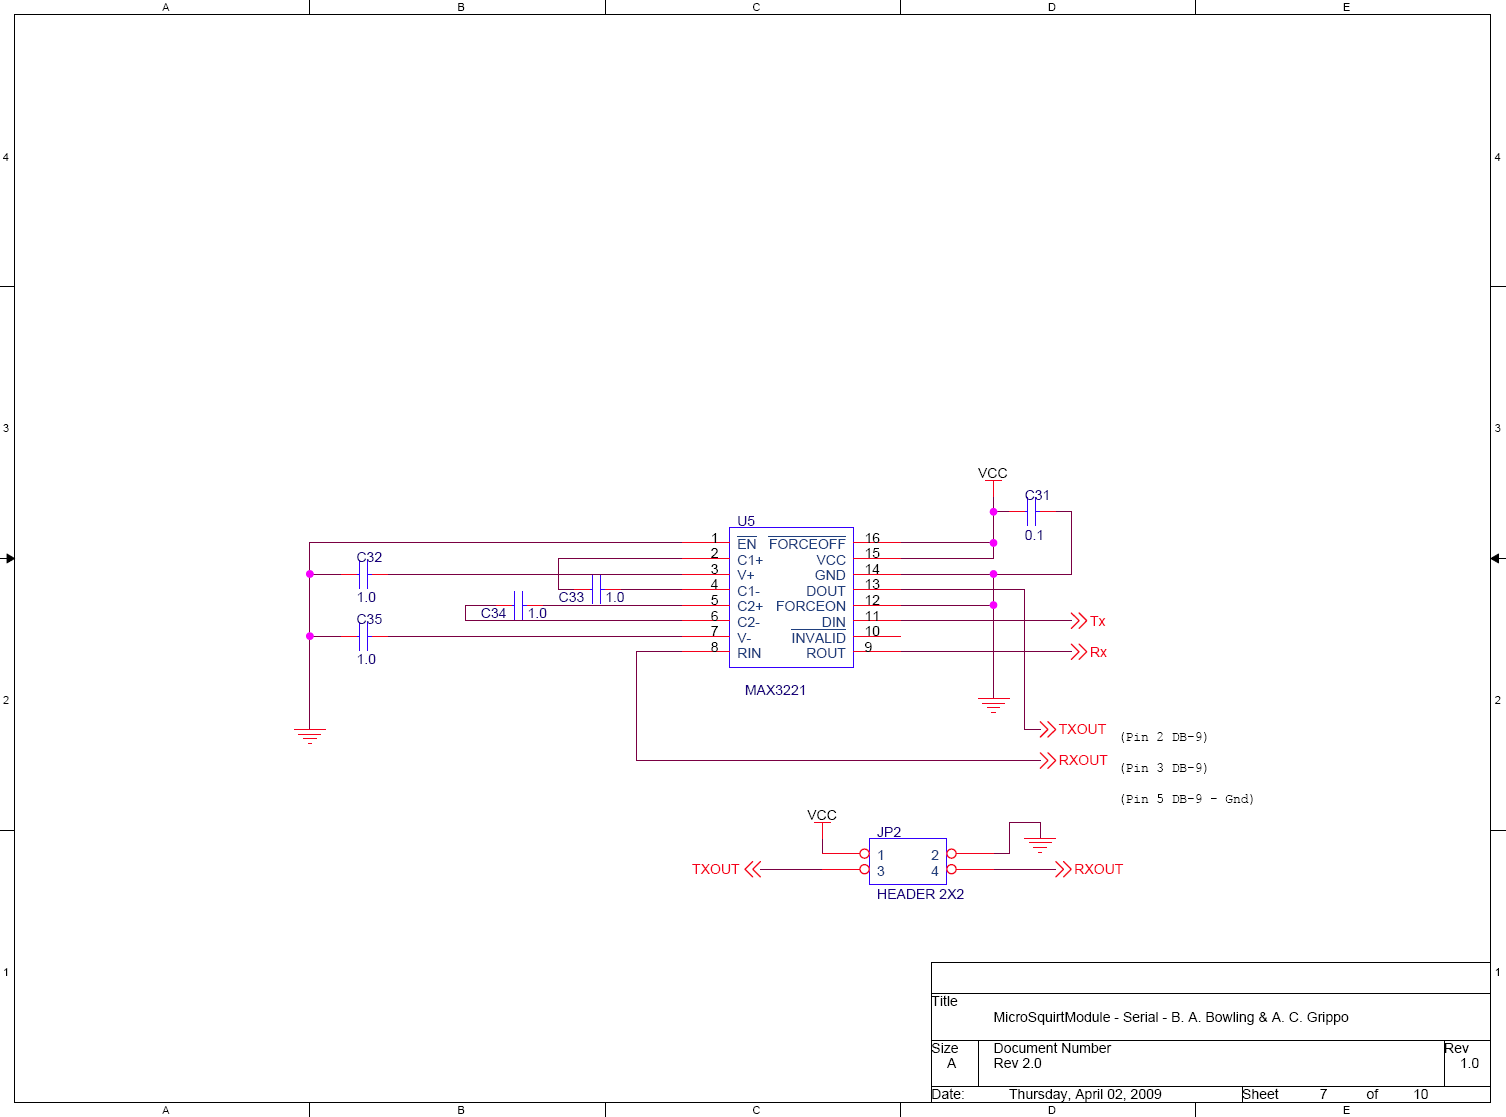 Microsquirt Wiring Diagram from www.microsquirtmodule.com